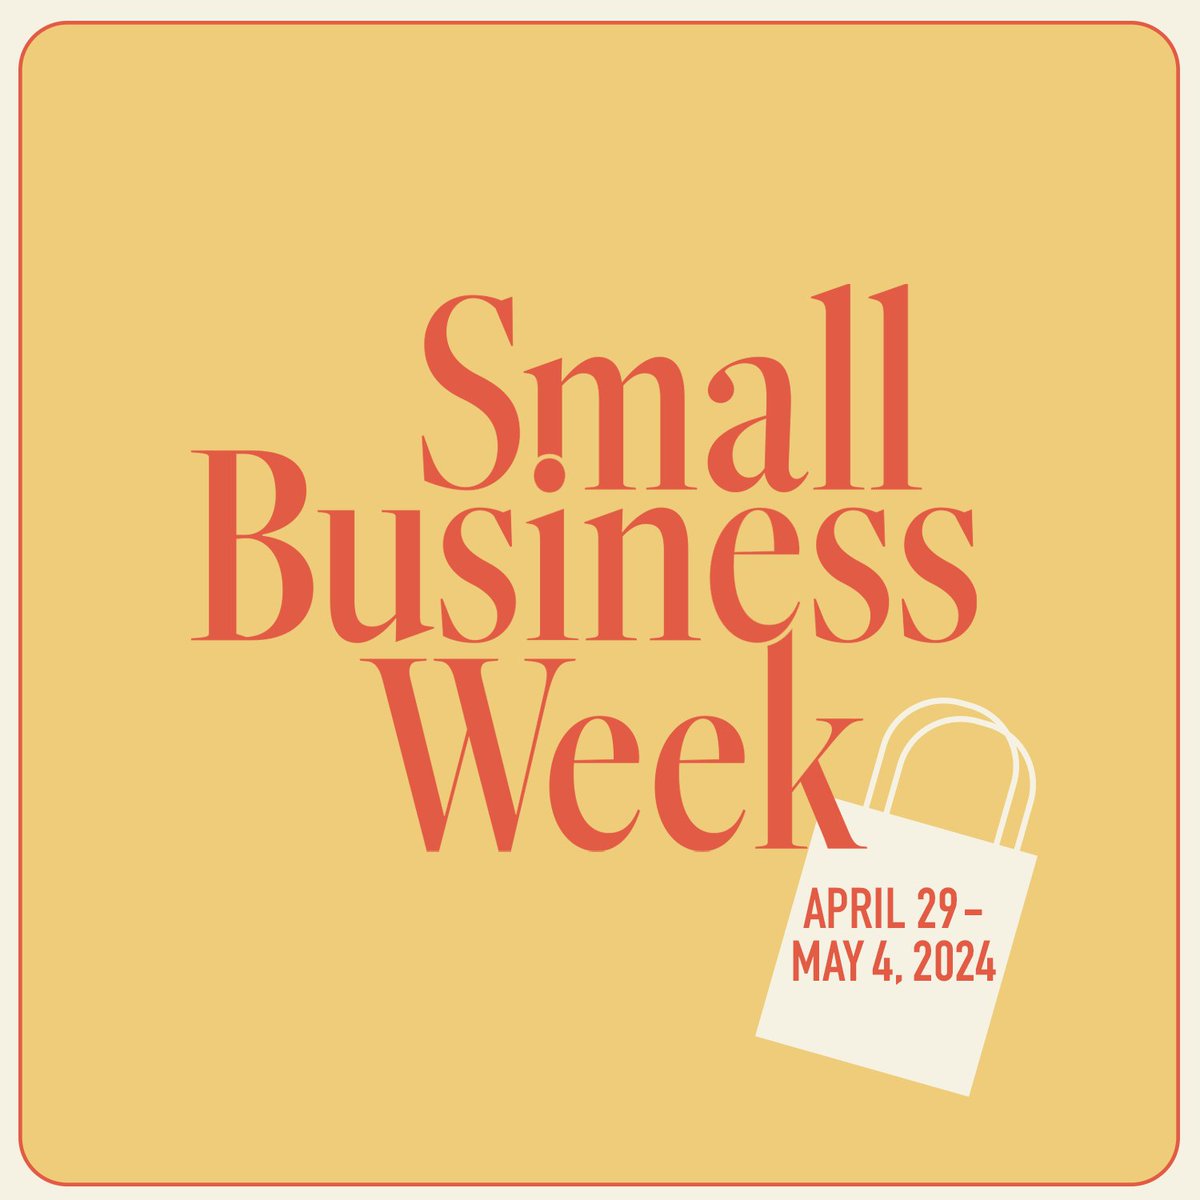 This week, we celebrate the creativity and hard work of local business owners across Indiana. Hoosier small businesses make a profound impact on our communities and are the backbone of our state’s economy.#SmallBusinessWeek